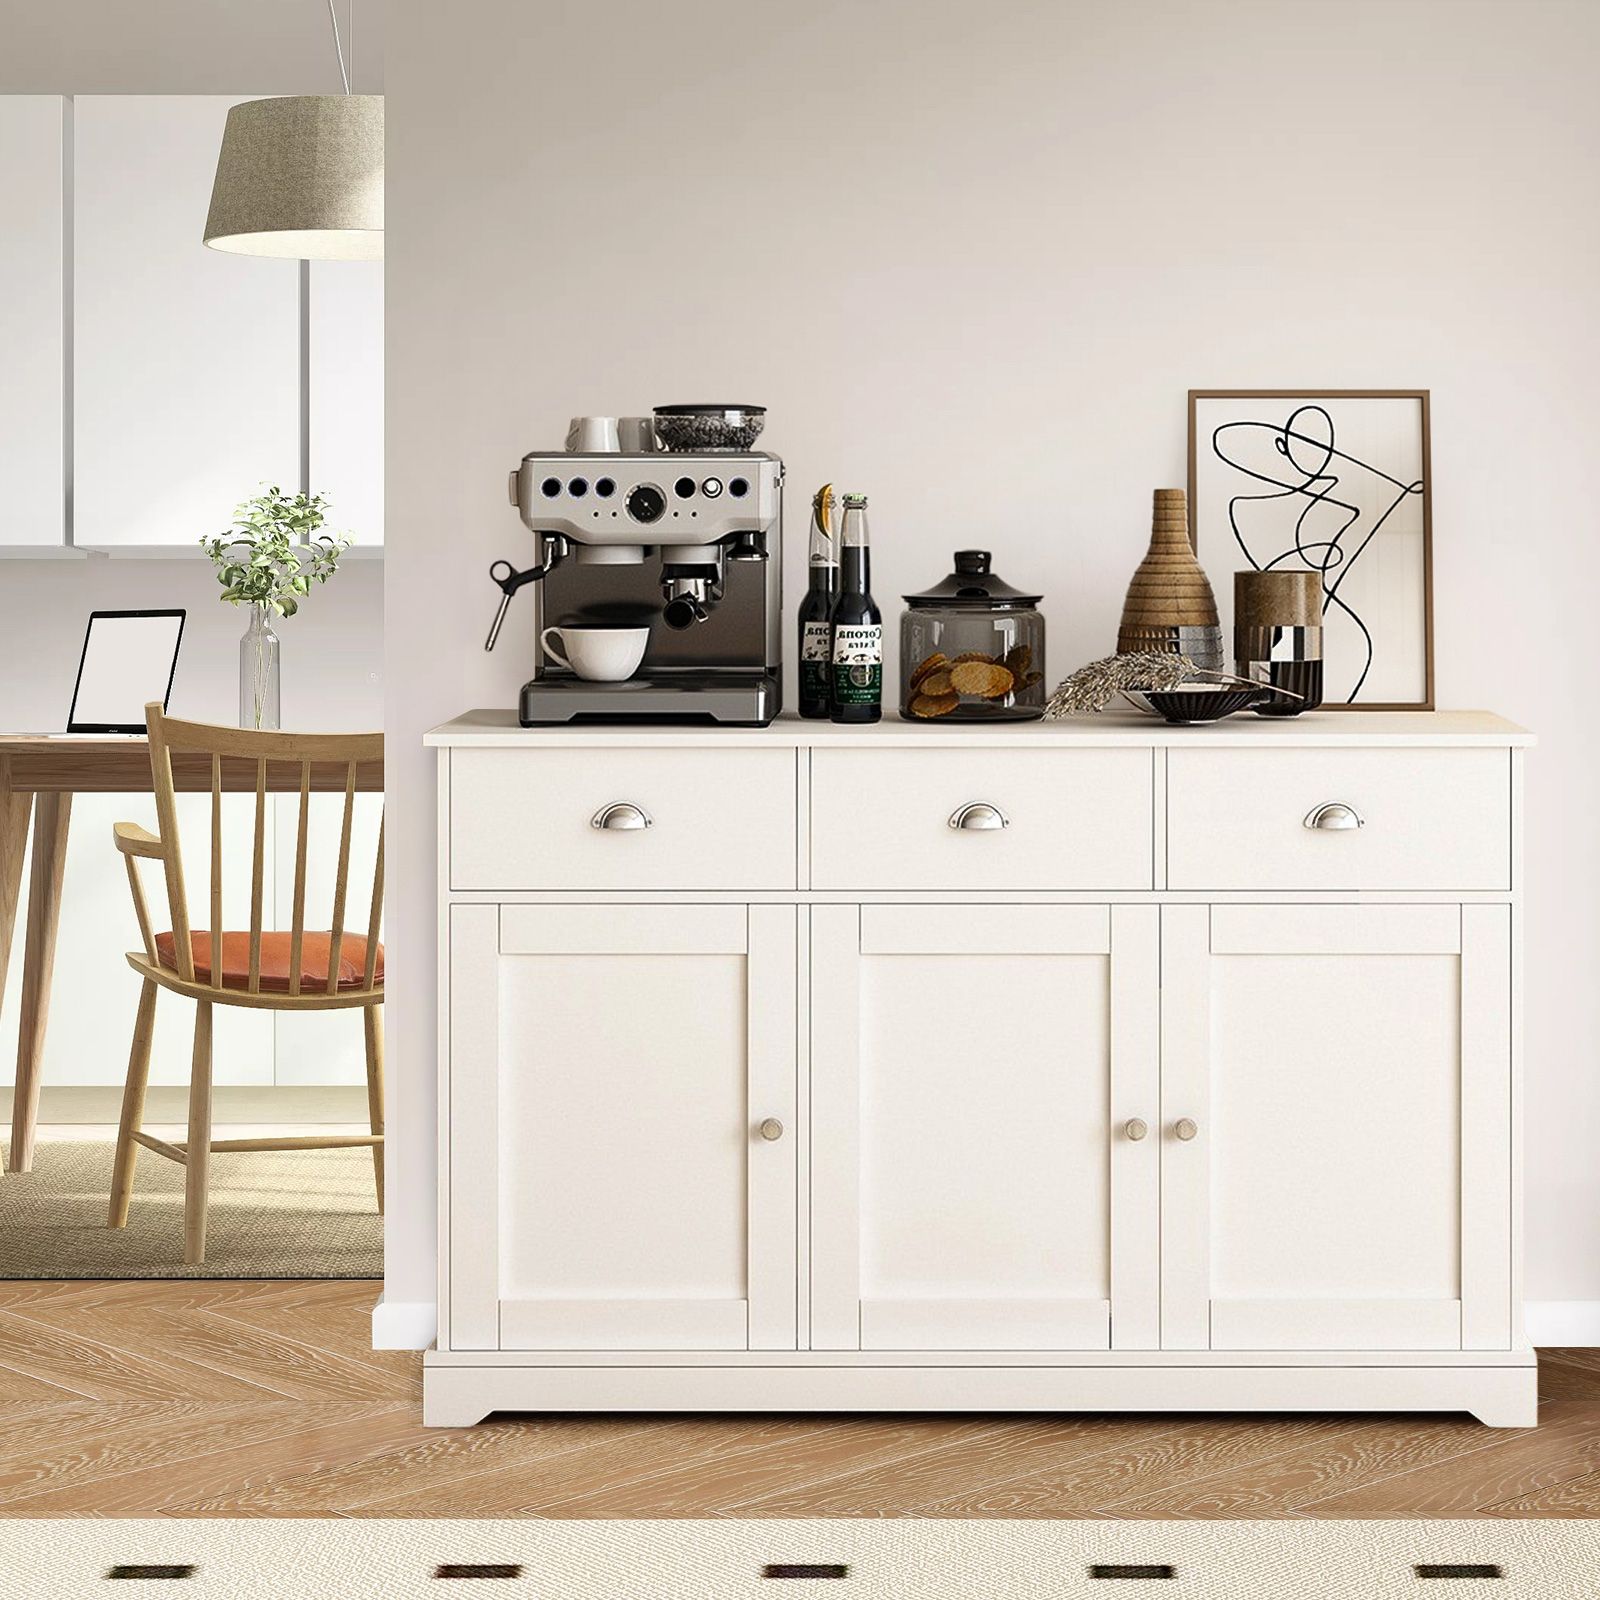 Buffet Sideboard Table Kitchen Pantry Storage Cabinet Console Hallway Cupboard Entryway Wine Organiser Unit White Drawers Doors